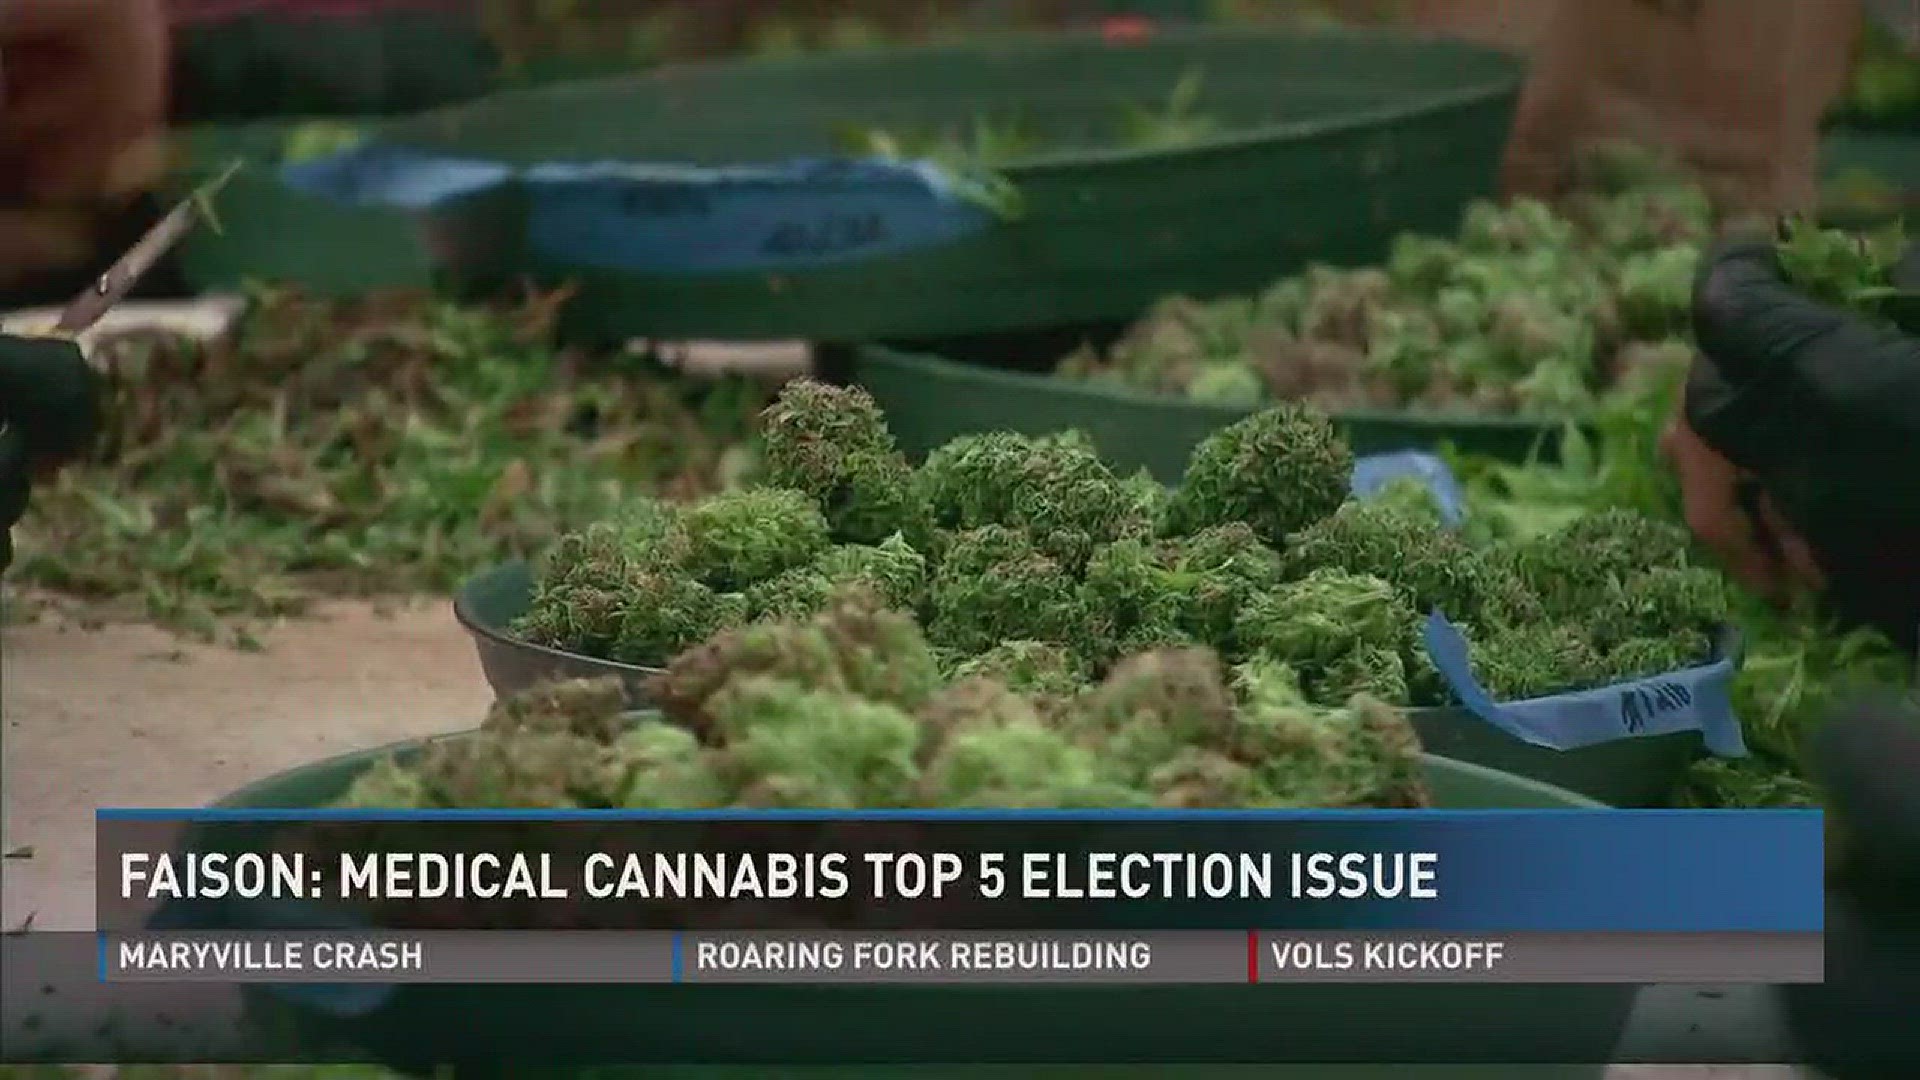 Medical cannabis will be in the top five election issues